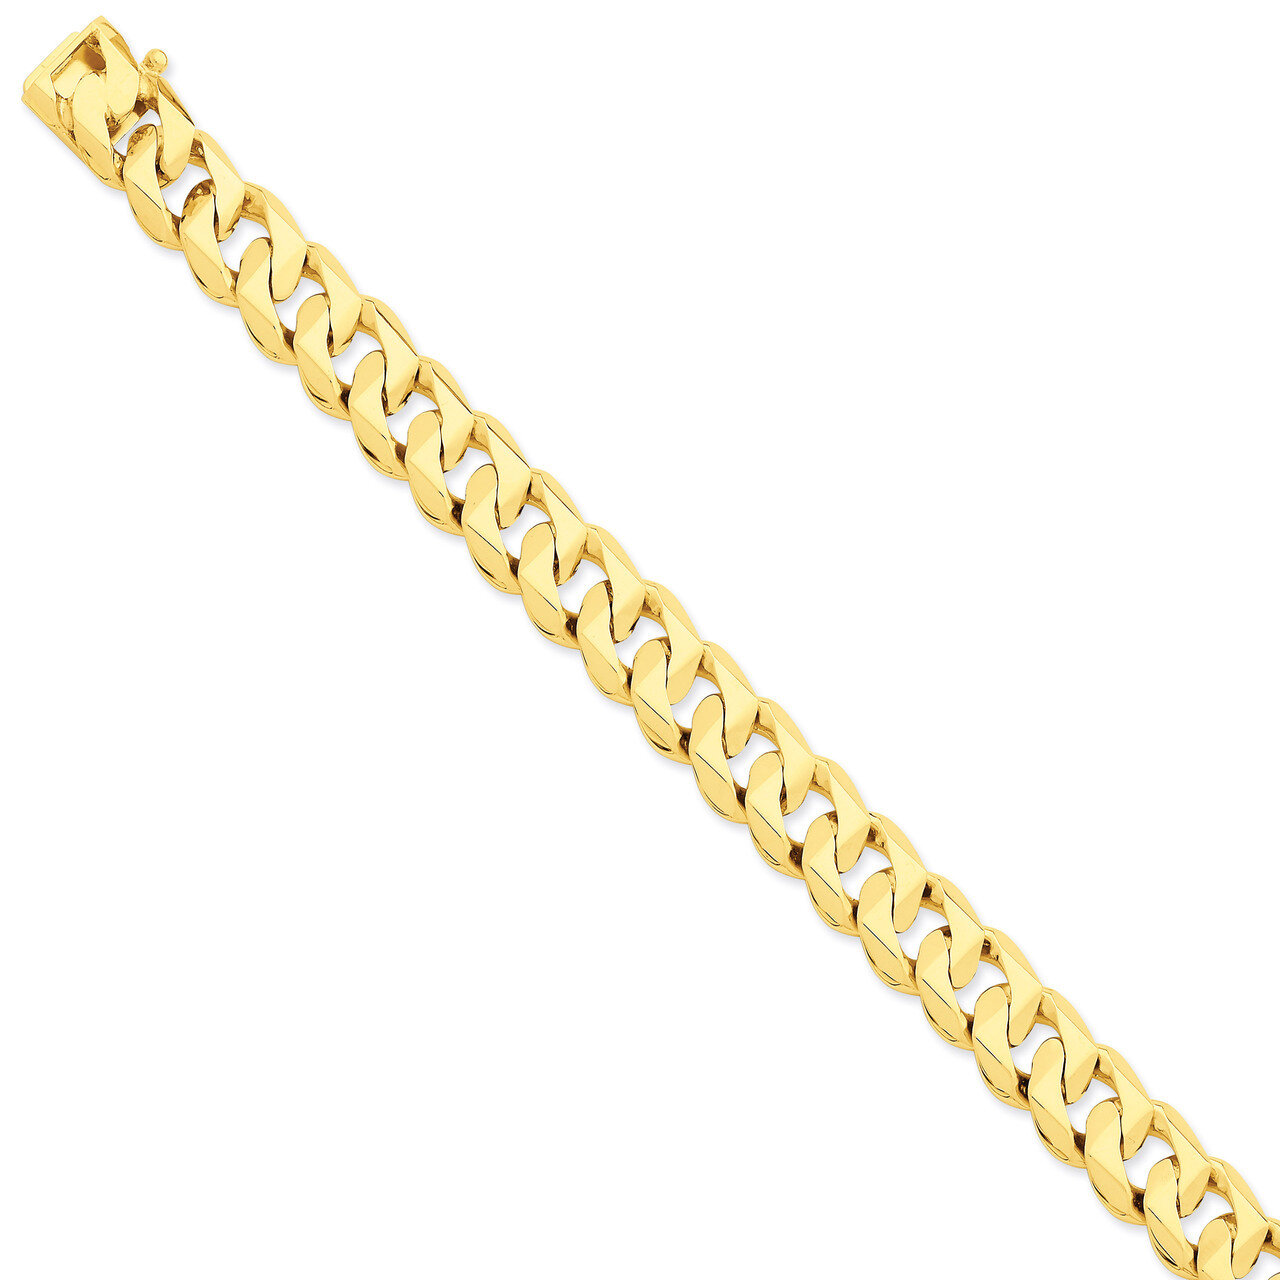 11mm Hand-polished Traditional Link Chain 8 Inch 14k Gold LK120-8